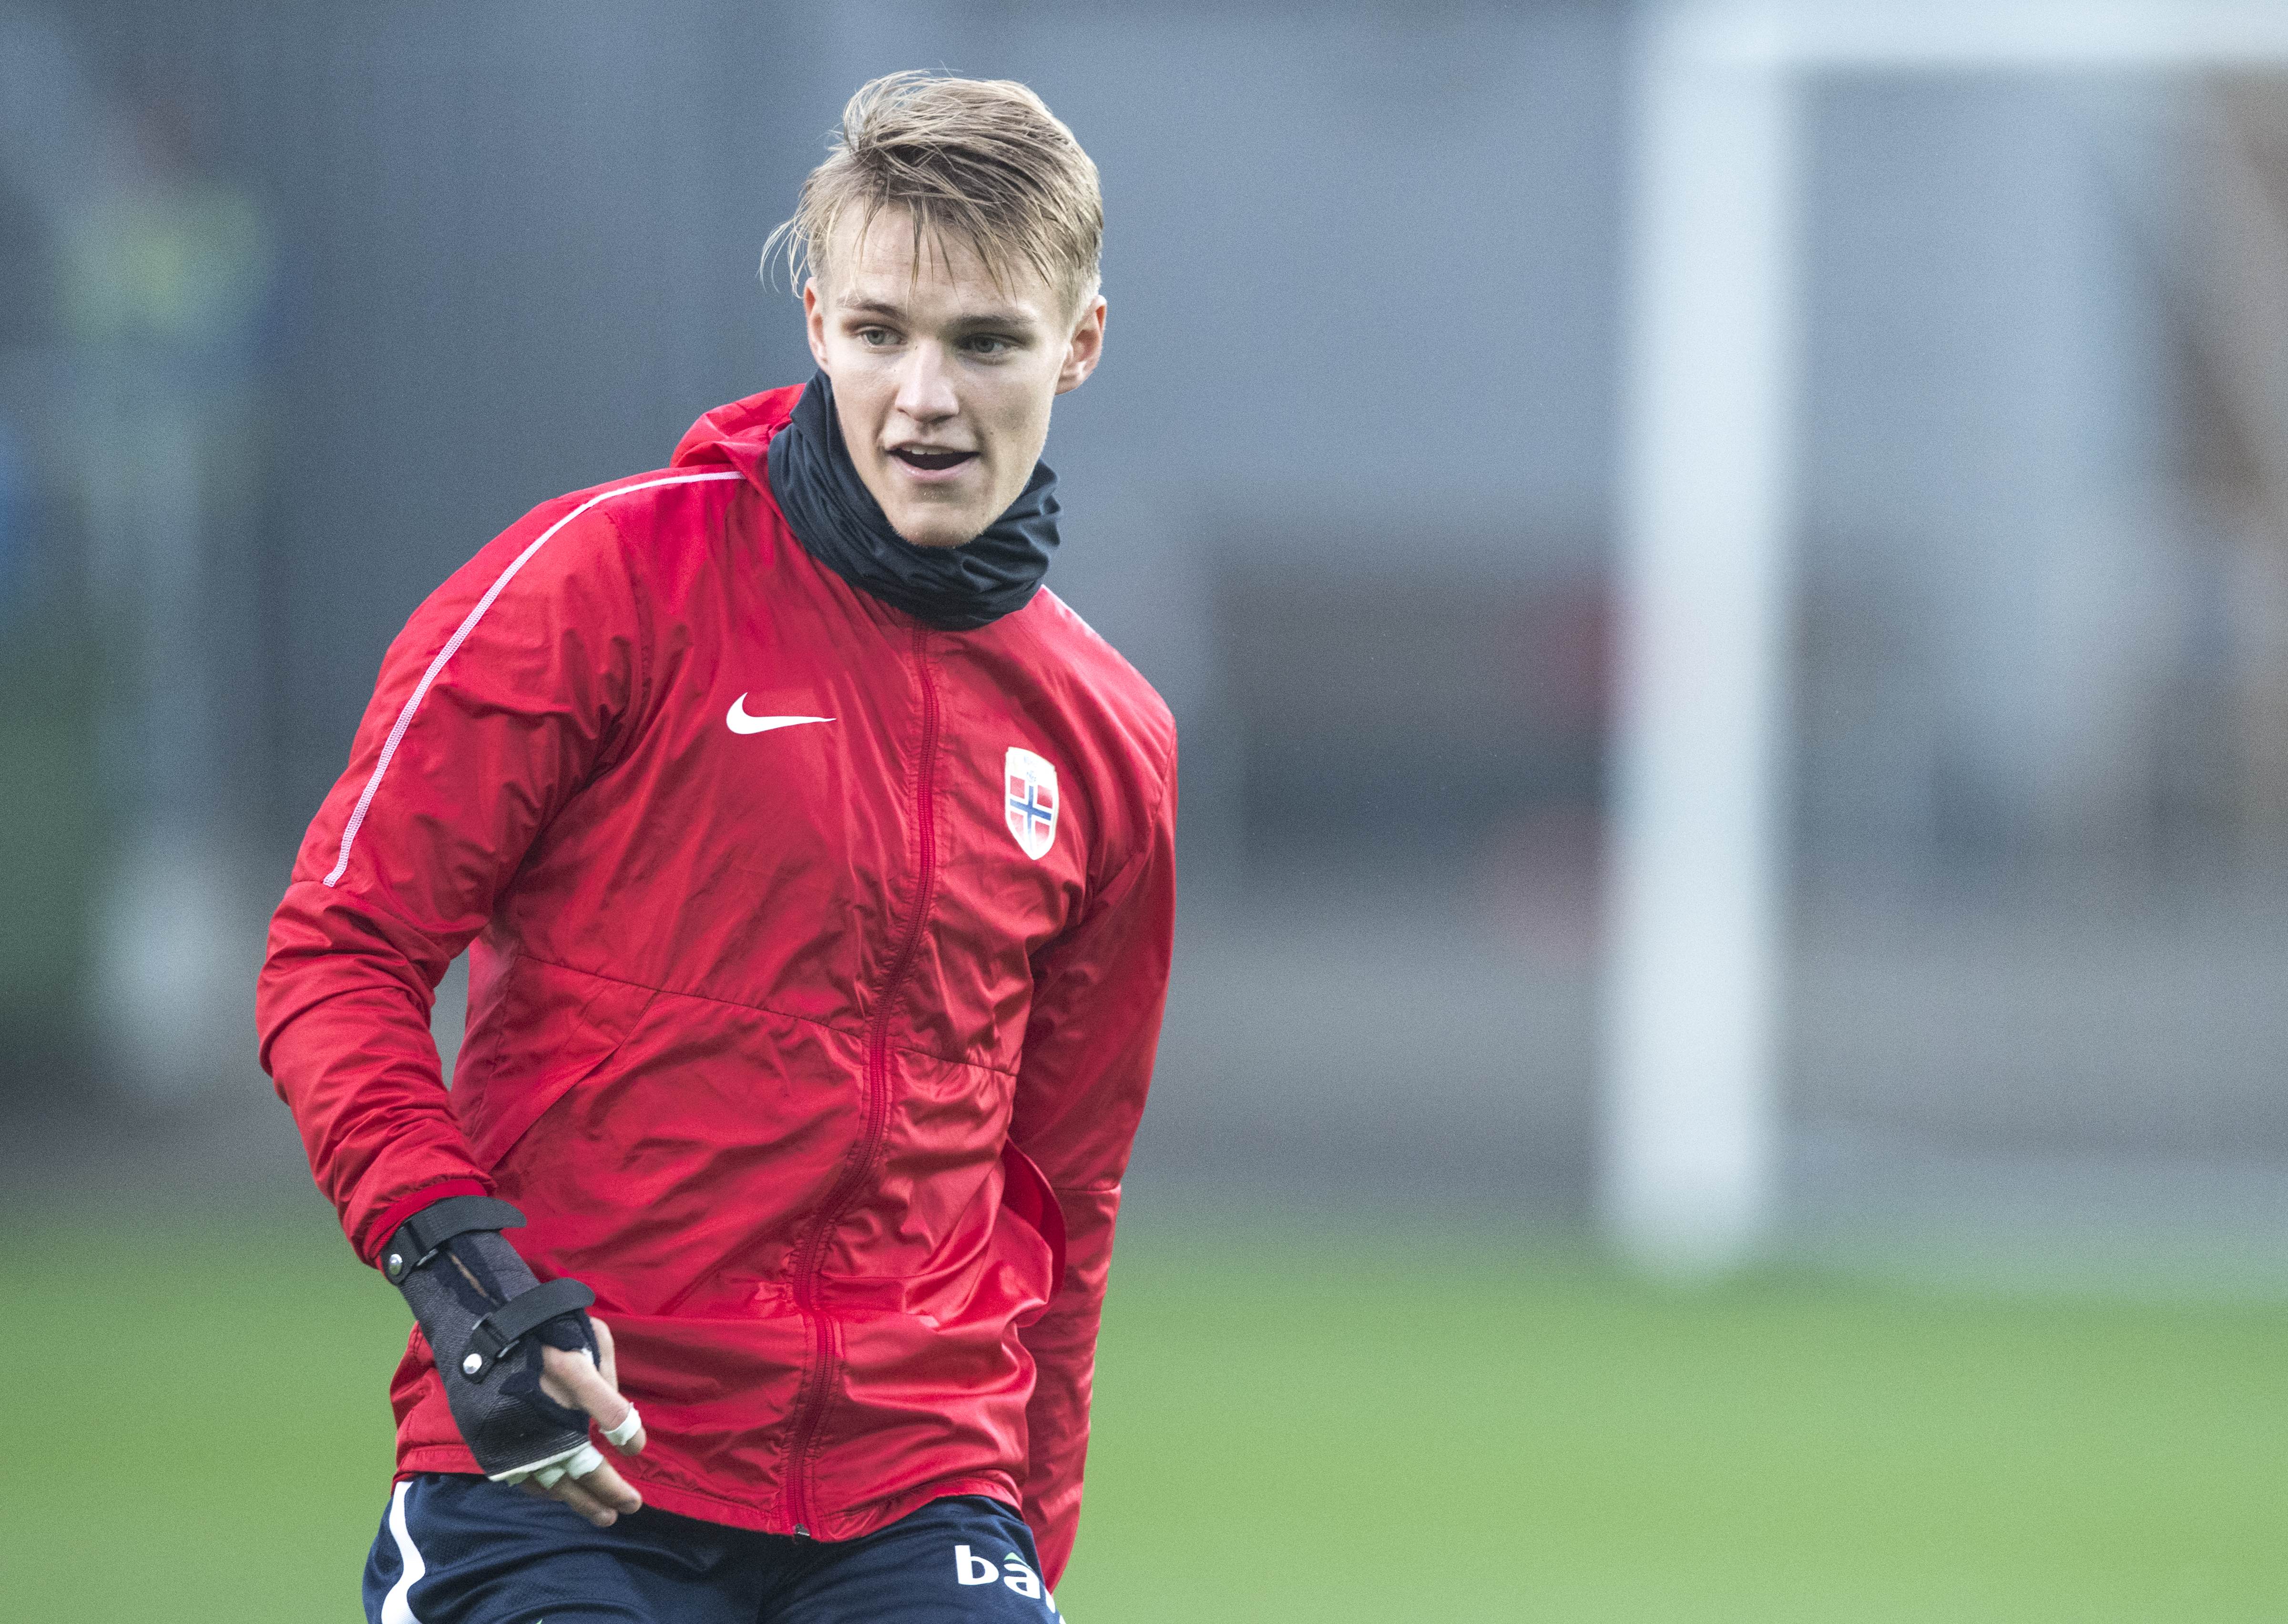 Odegaard has been outstanding for Arsenal (Photo by Trond Tandberg/Getty Images)